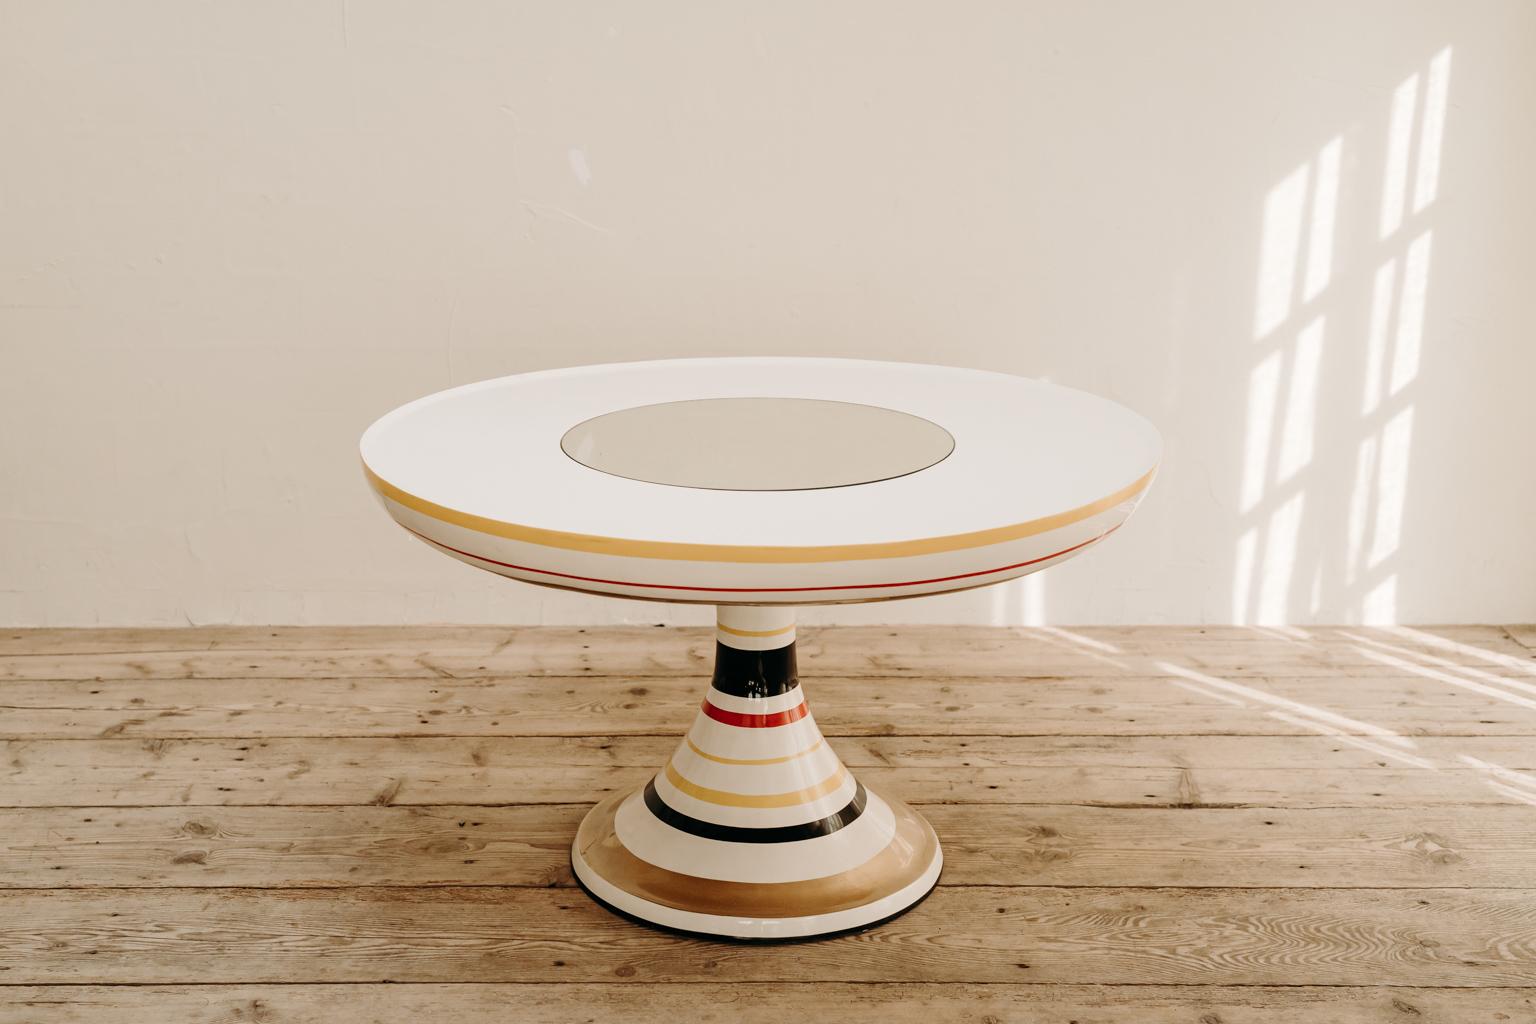 A rare find this table, called Dulan, made in polyester and glass, Italy early 2000's, designed by Italian architect
Valentina Audrito. The round surface of the top as well as the base are decorative hand-painted. The top is equipped with a round